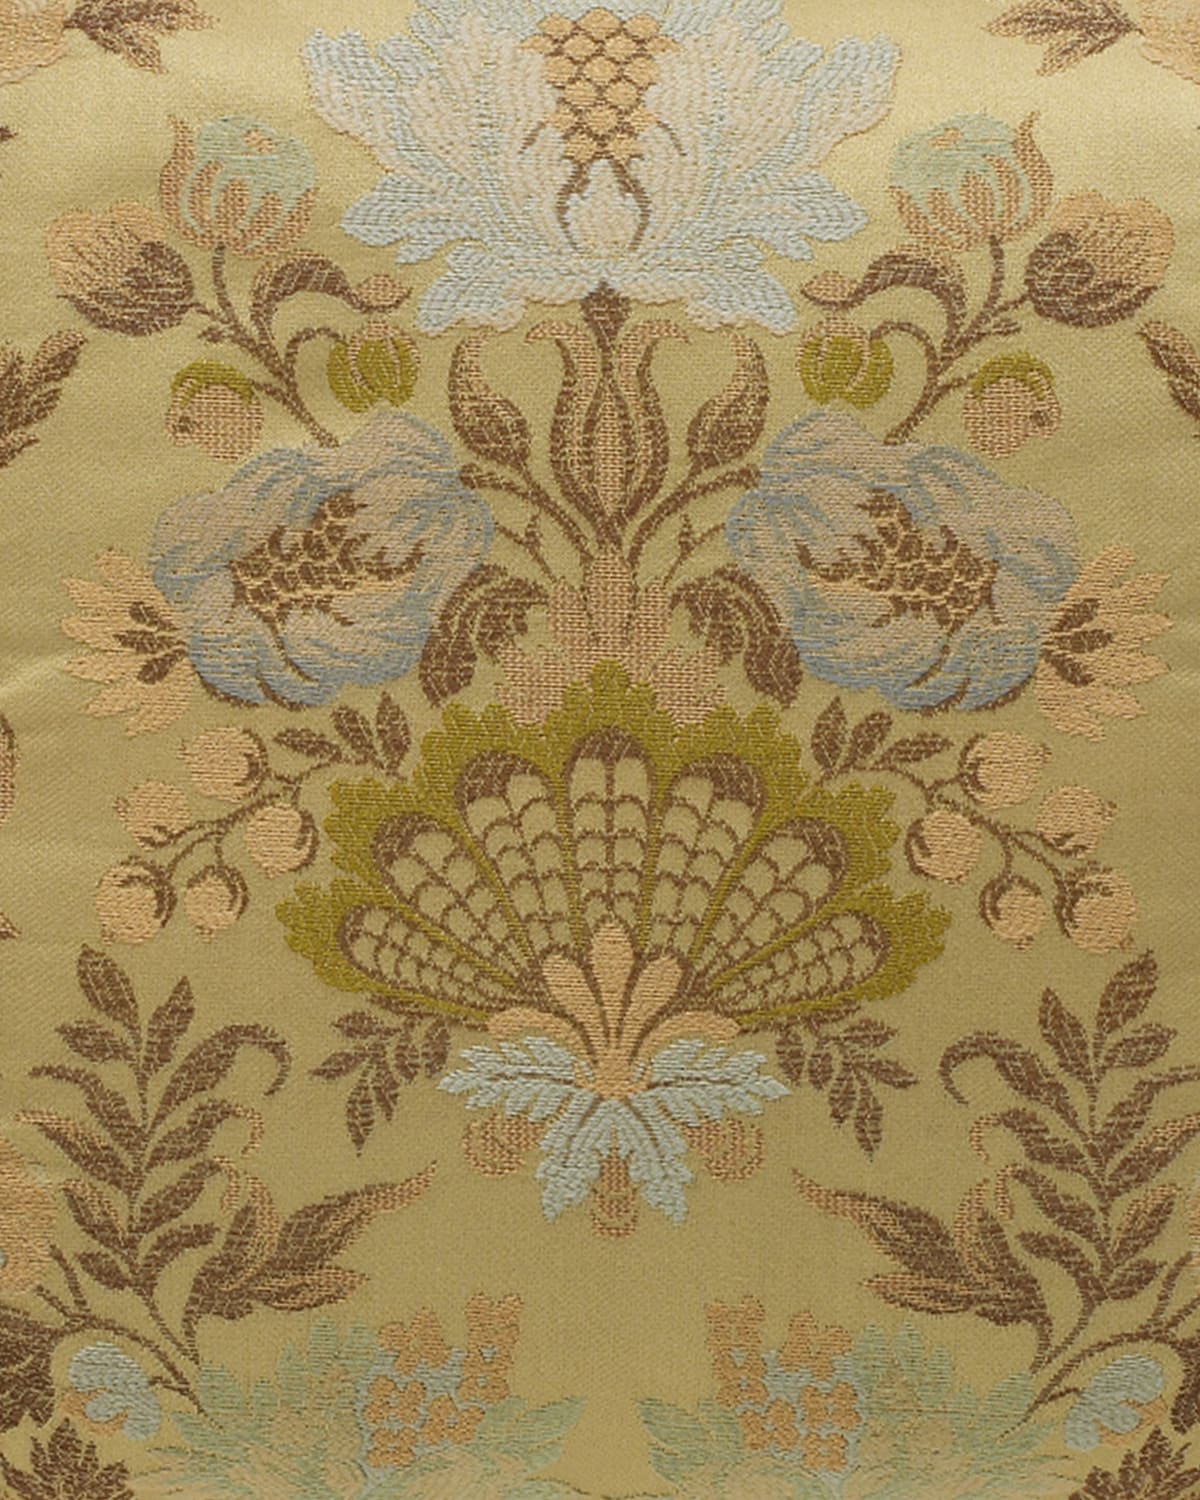 Image Dian Austin Couture Home Petit Trianon Floral Fabric, 3 yards x 54"W